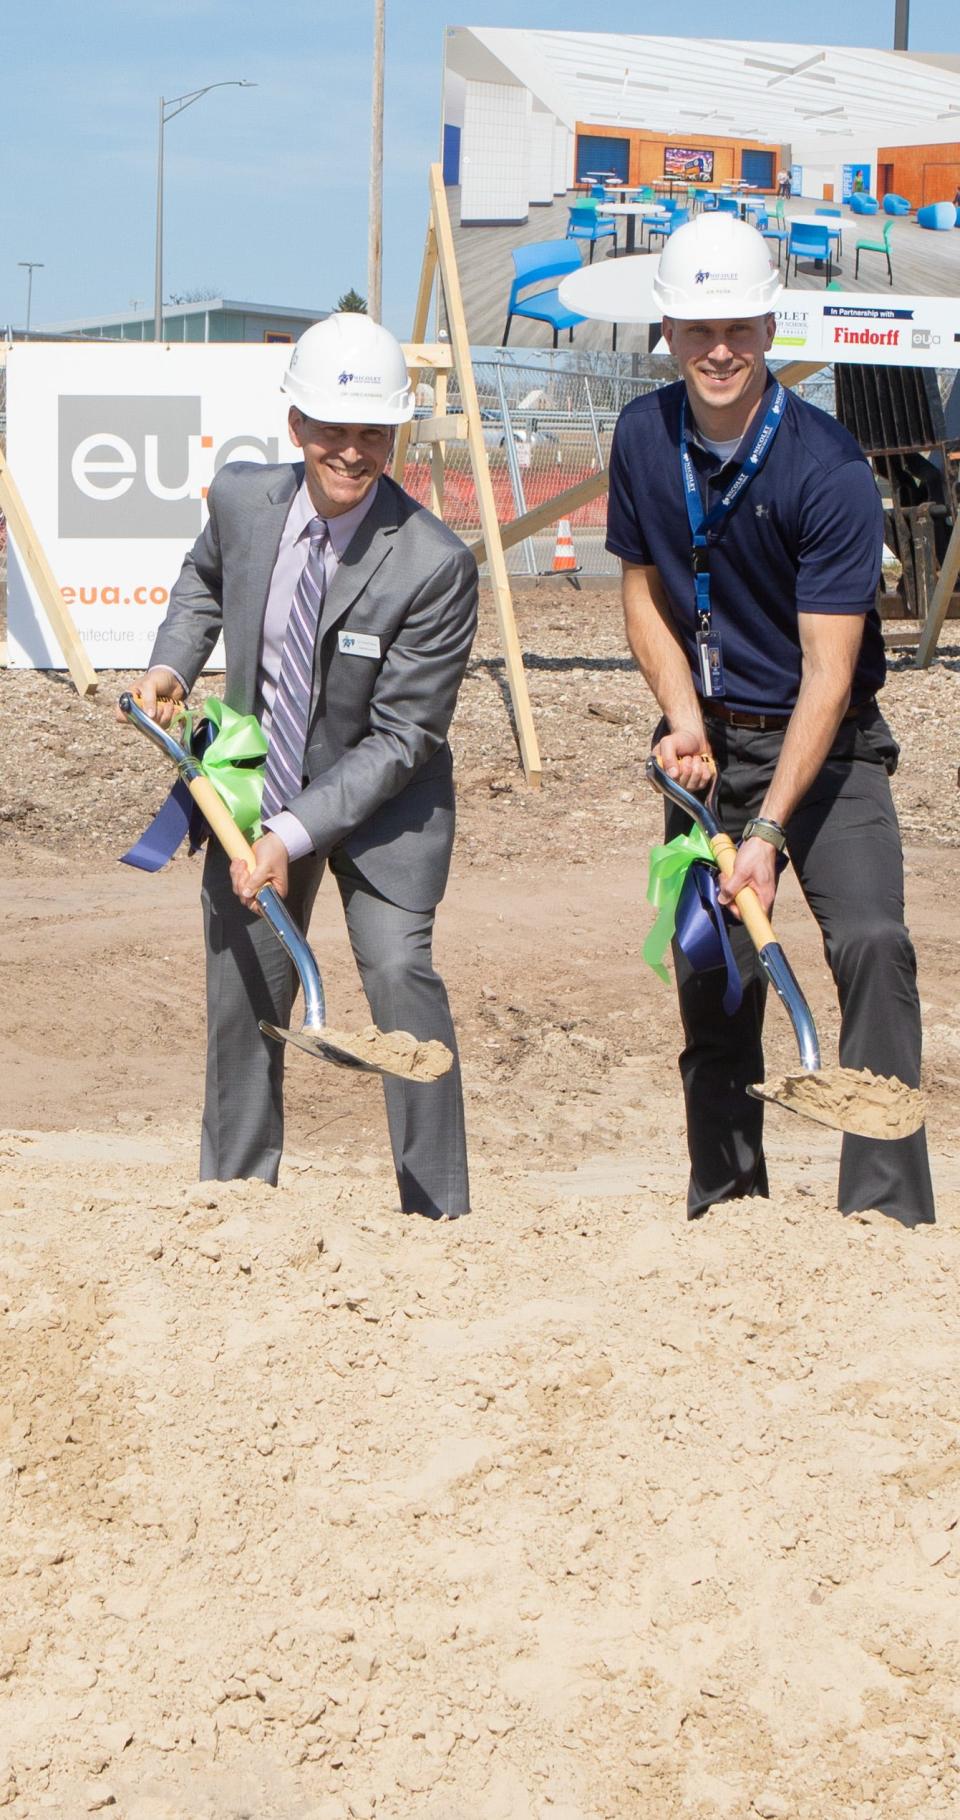 From left to right: Nicolet Union High School District Superintendent Dr. Greg Kabara, Nicolet Union High School Principal Joe Patek participate in a groundbreaking ceremony April 13 to officially kick off the construction on $77.4 million worth of facilities projects approved by voters in April 2022.